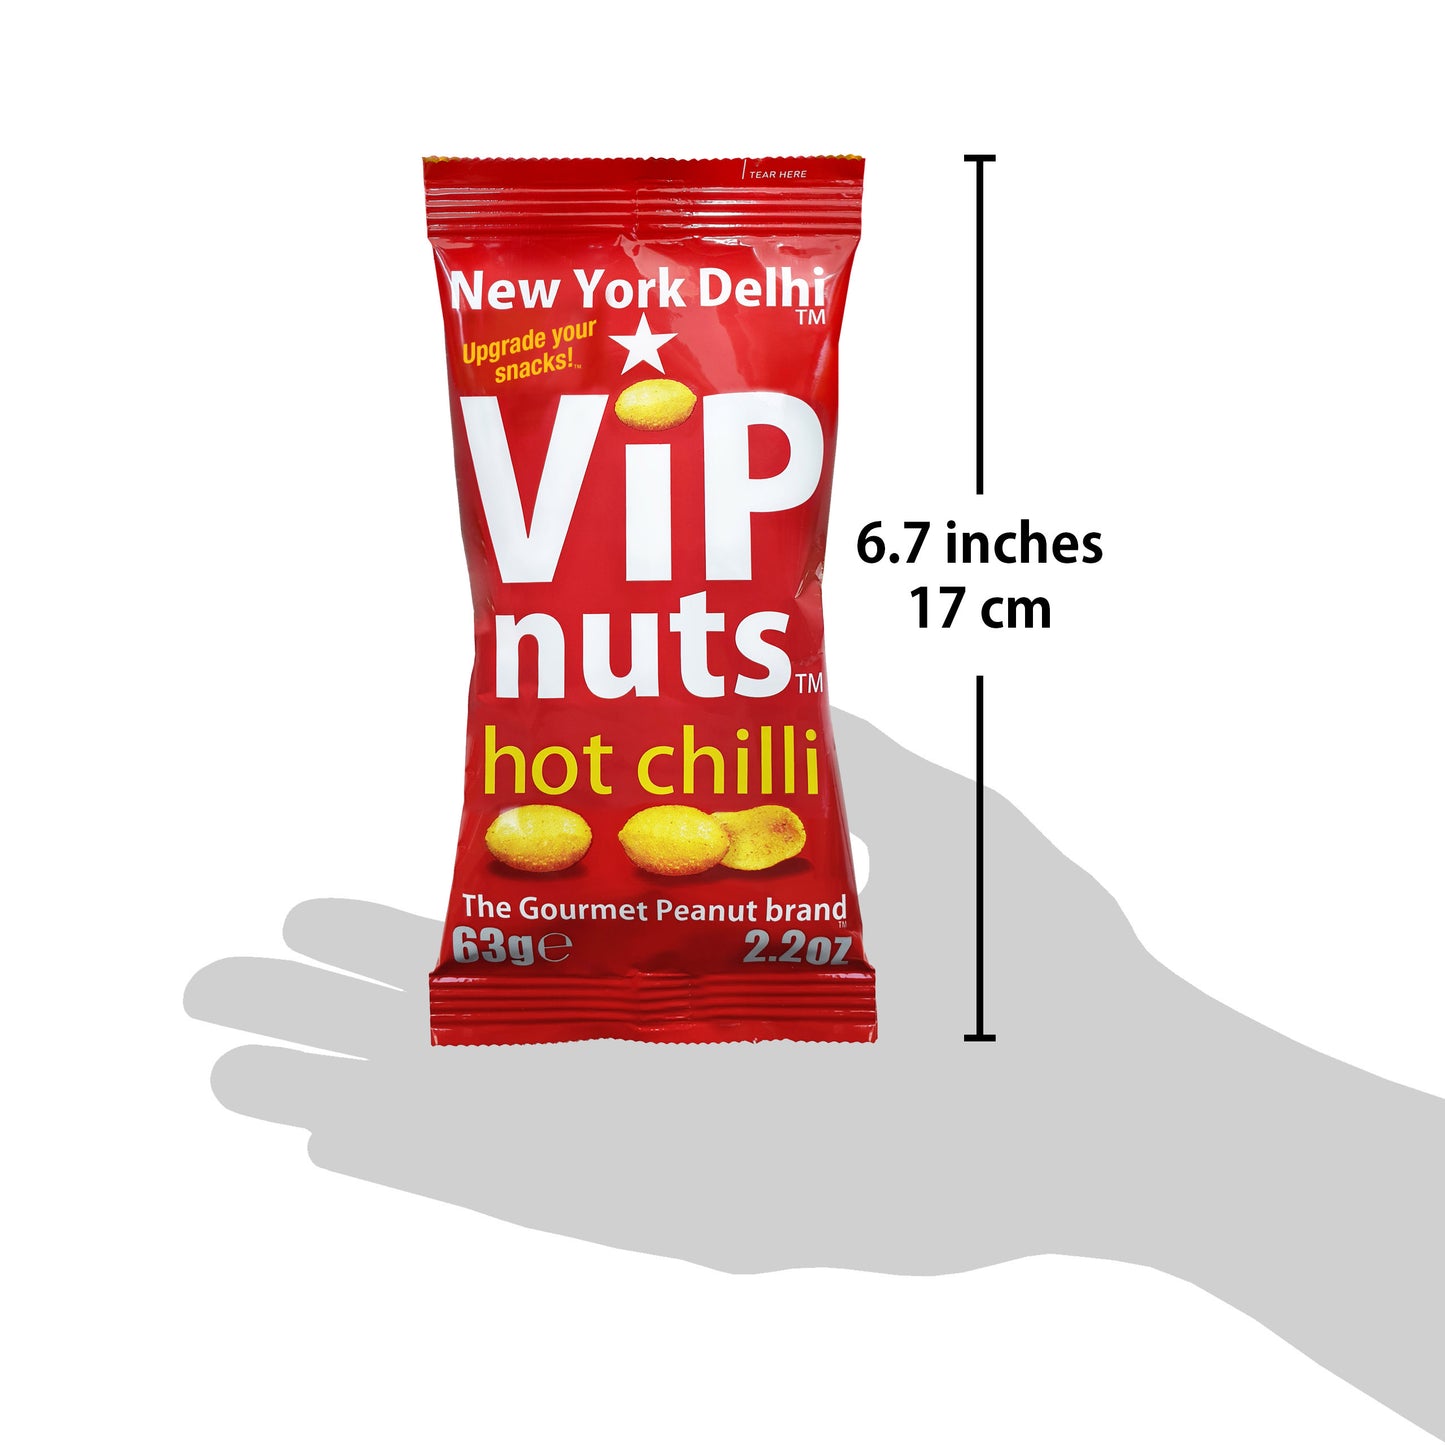 ViPnuts Ultimate Selection snack Box 12 x 63g - in easy to wrap gift box